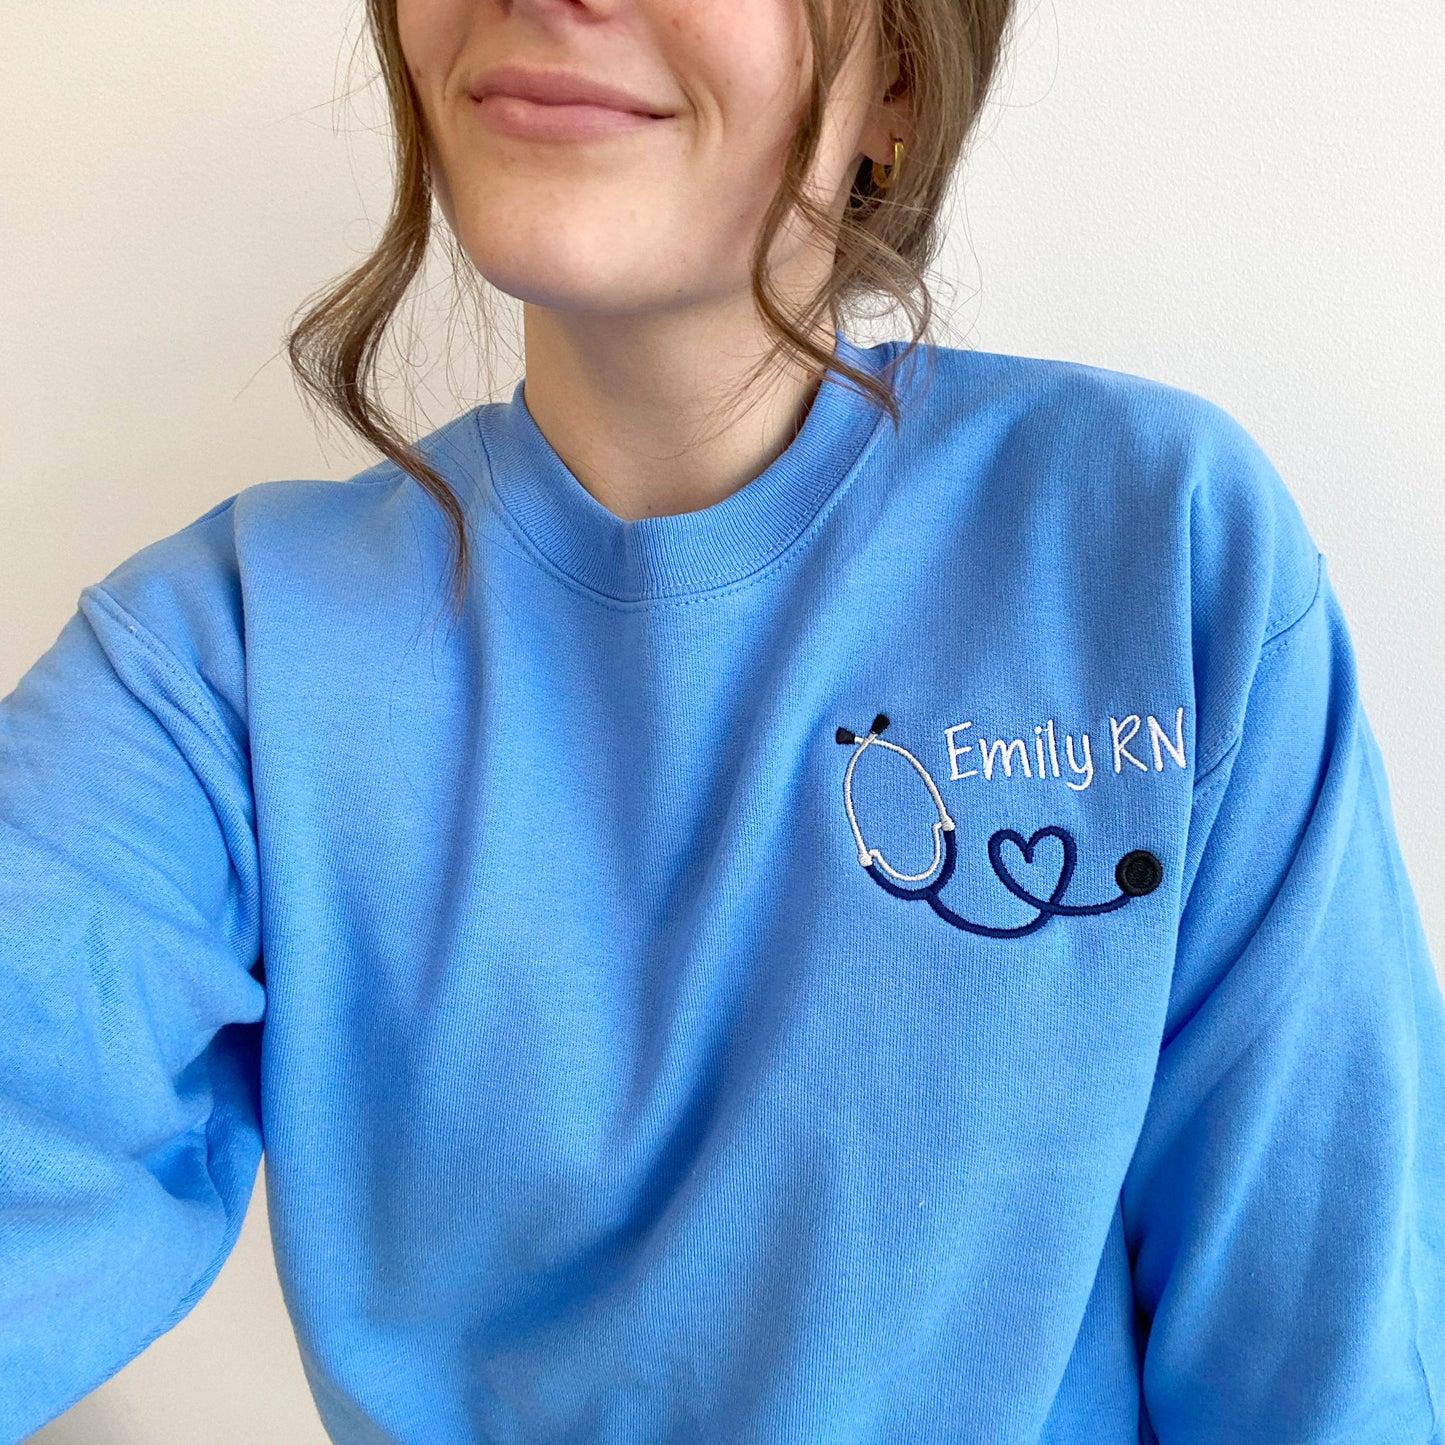 clos up of young woman wearing a Carolina blue crewneck sweatshirt with custom mini heart stethoscope design embroidered on the left chest in navy and white threads